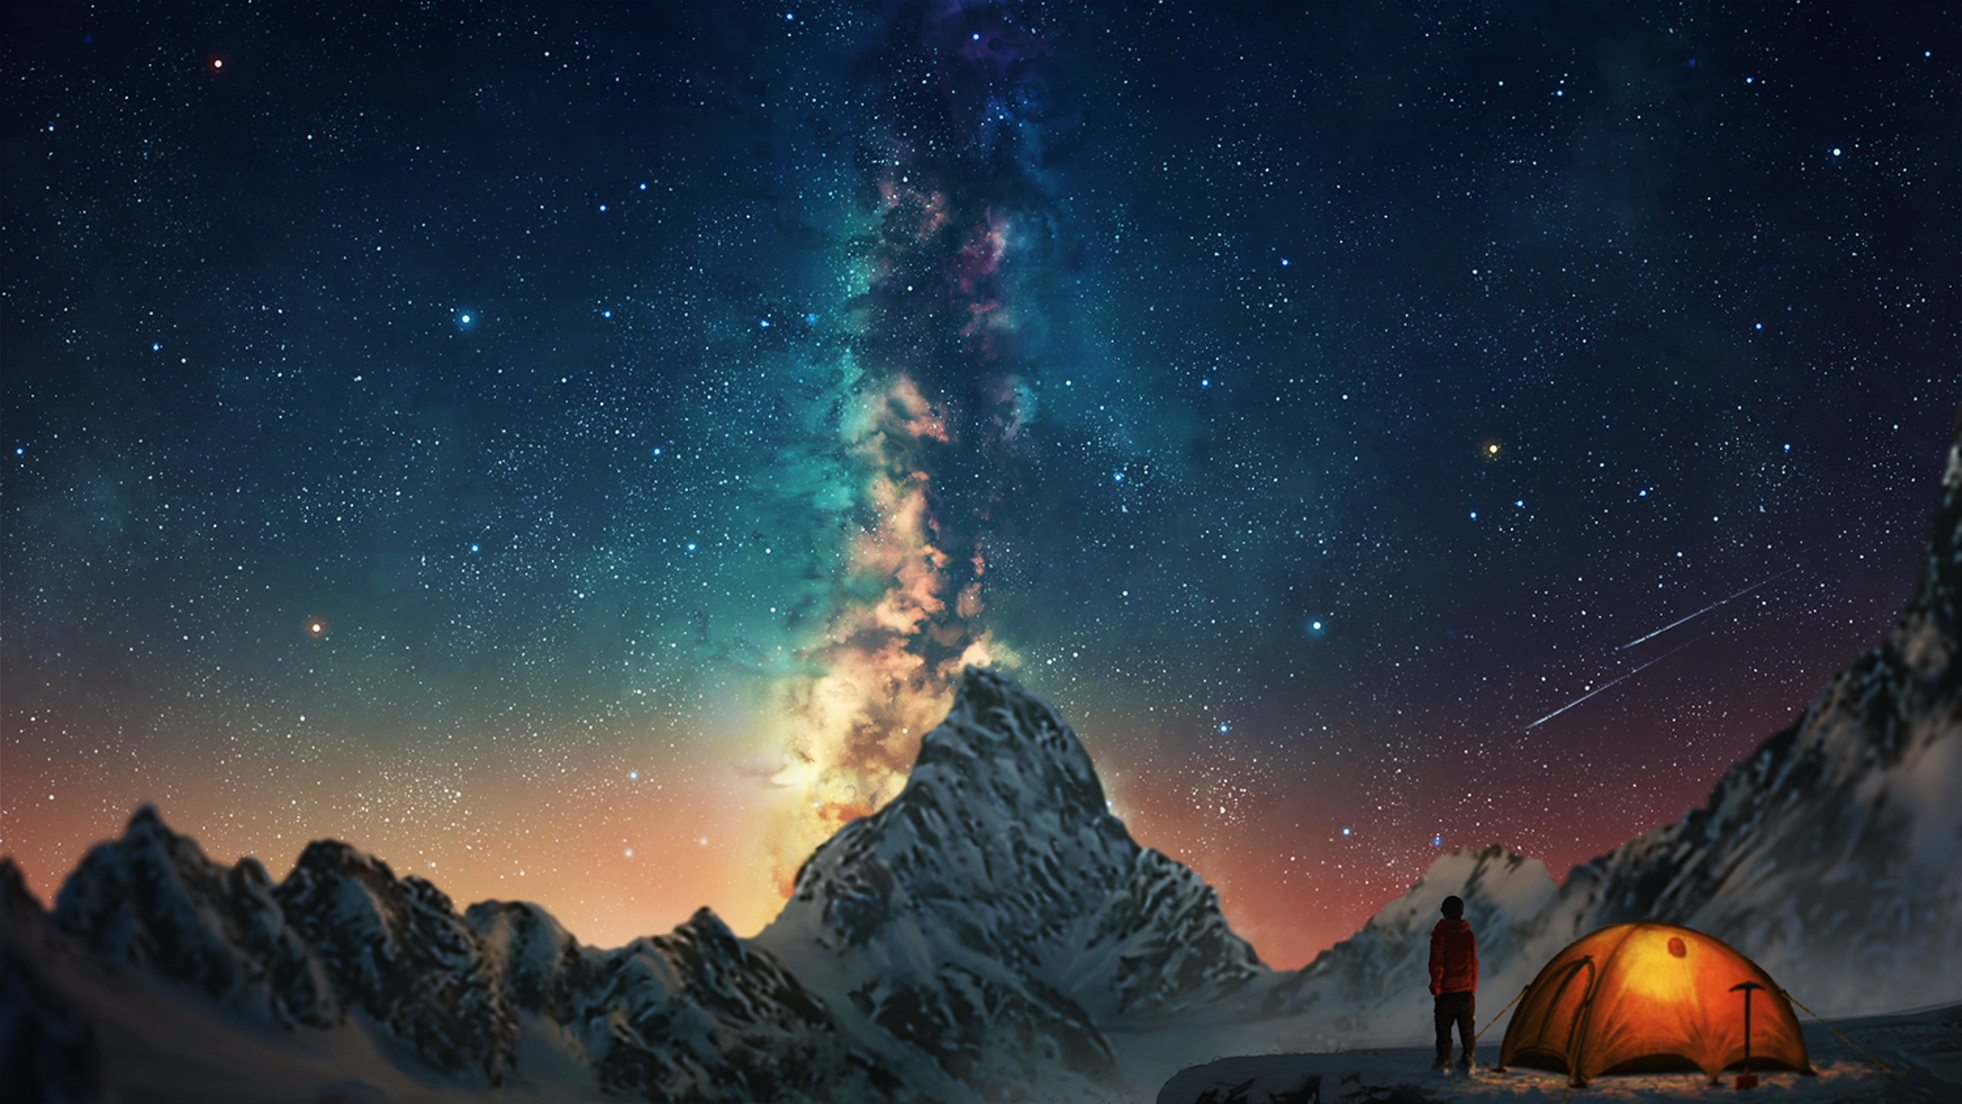 android fantasy, sky, aurora australis, camping, comet, mountain, snow, stars